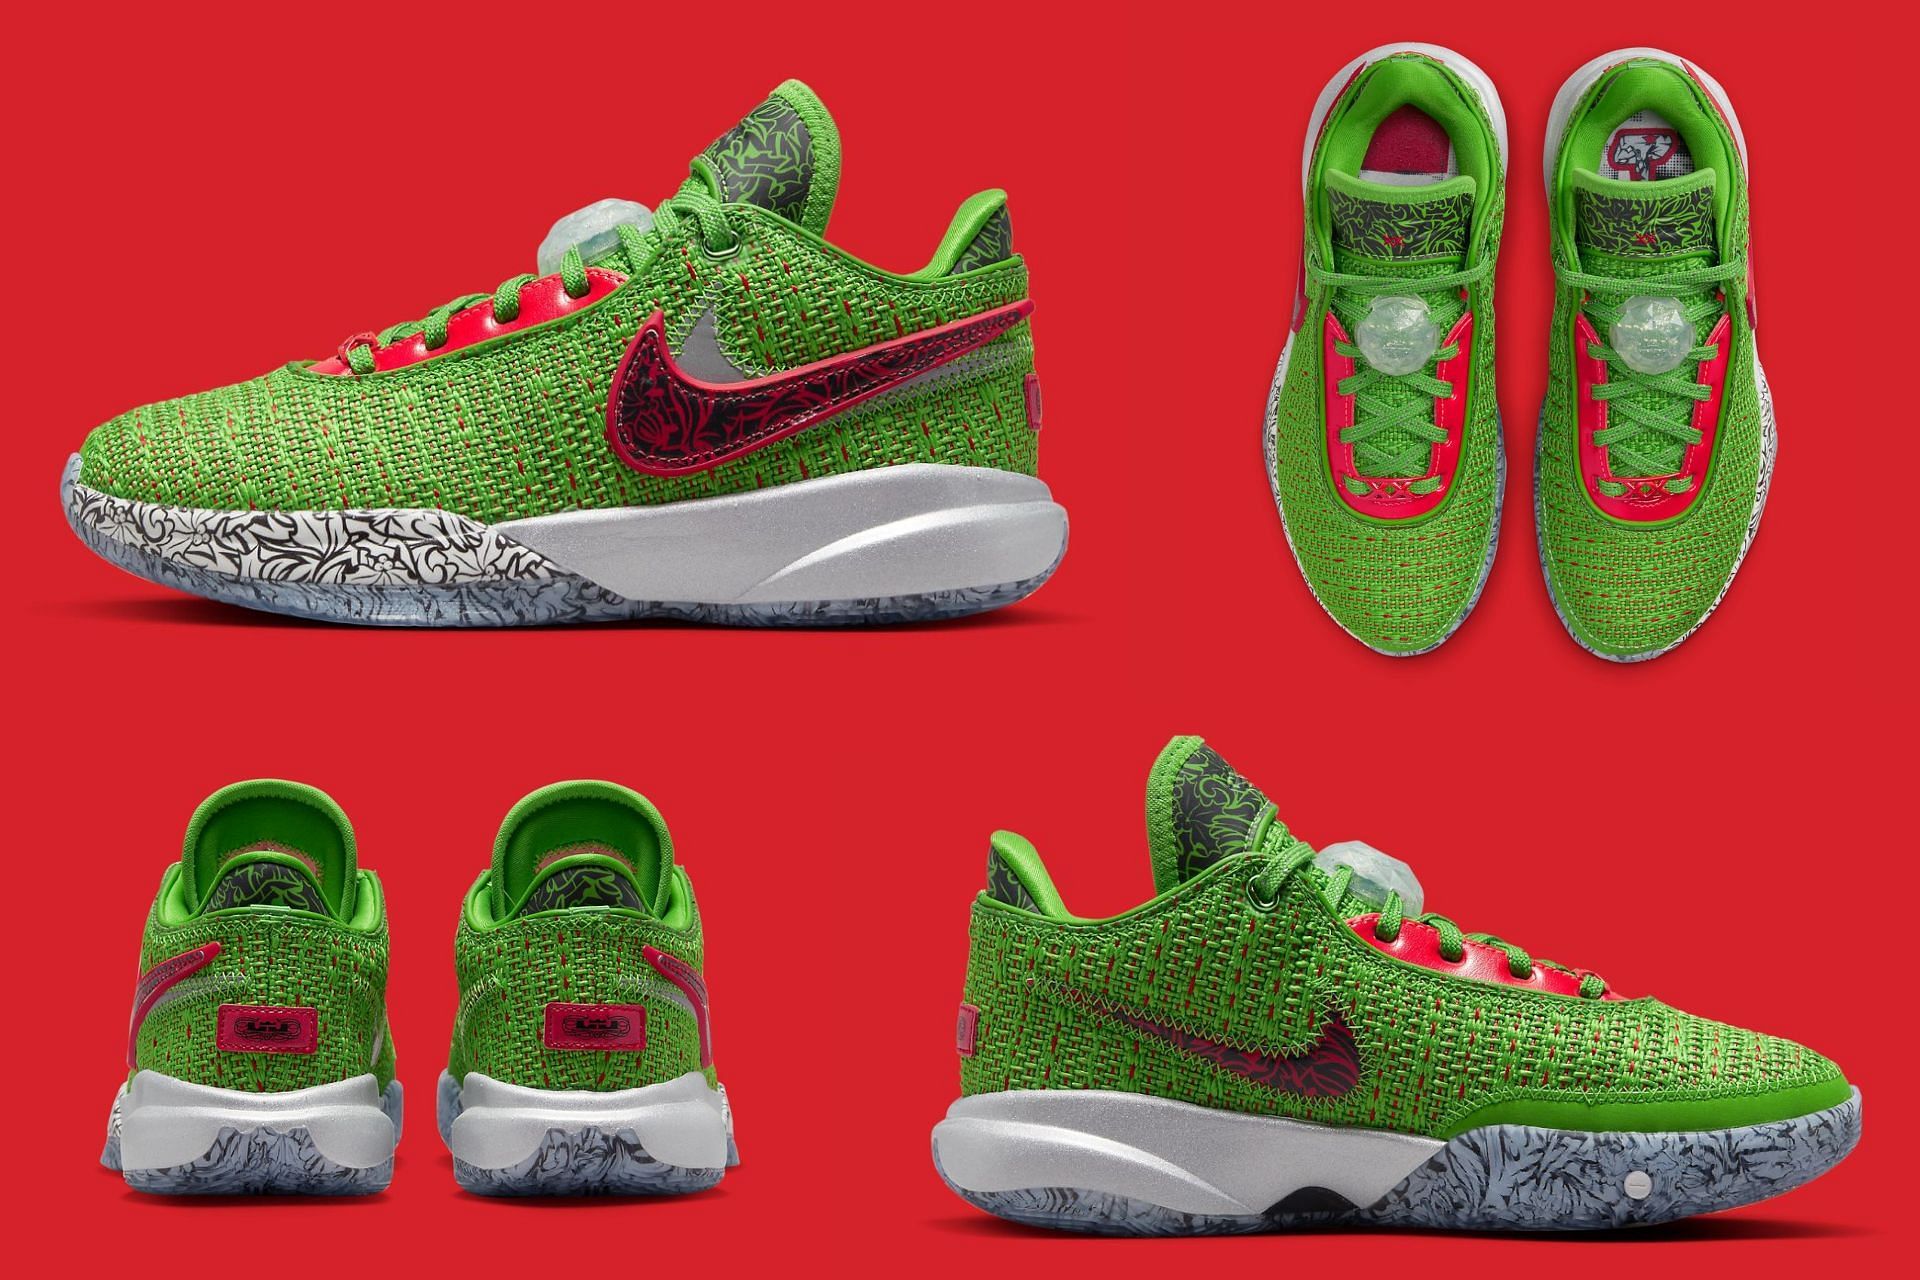 Where to buy Nike LeBron 20 “Christmas” GS shoes? Price and more